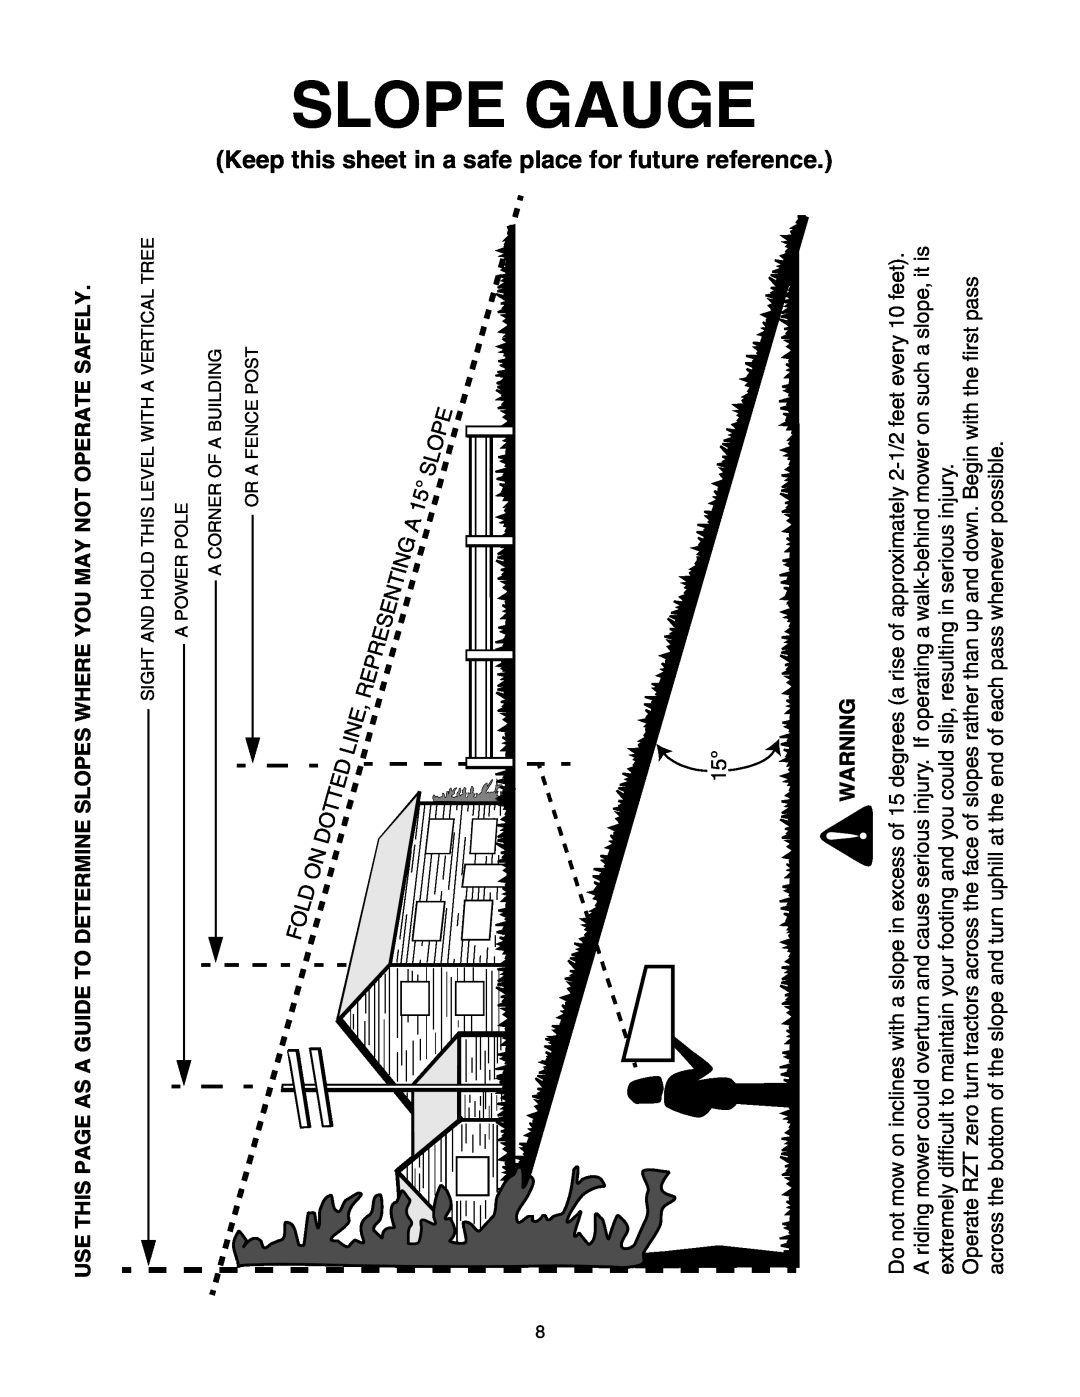 Cub Cadet RZT 50 manual Keep this sheet in a safe place for future reference, Slope Gauge 